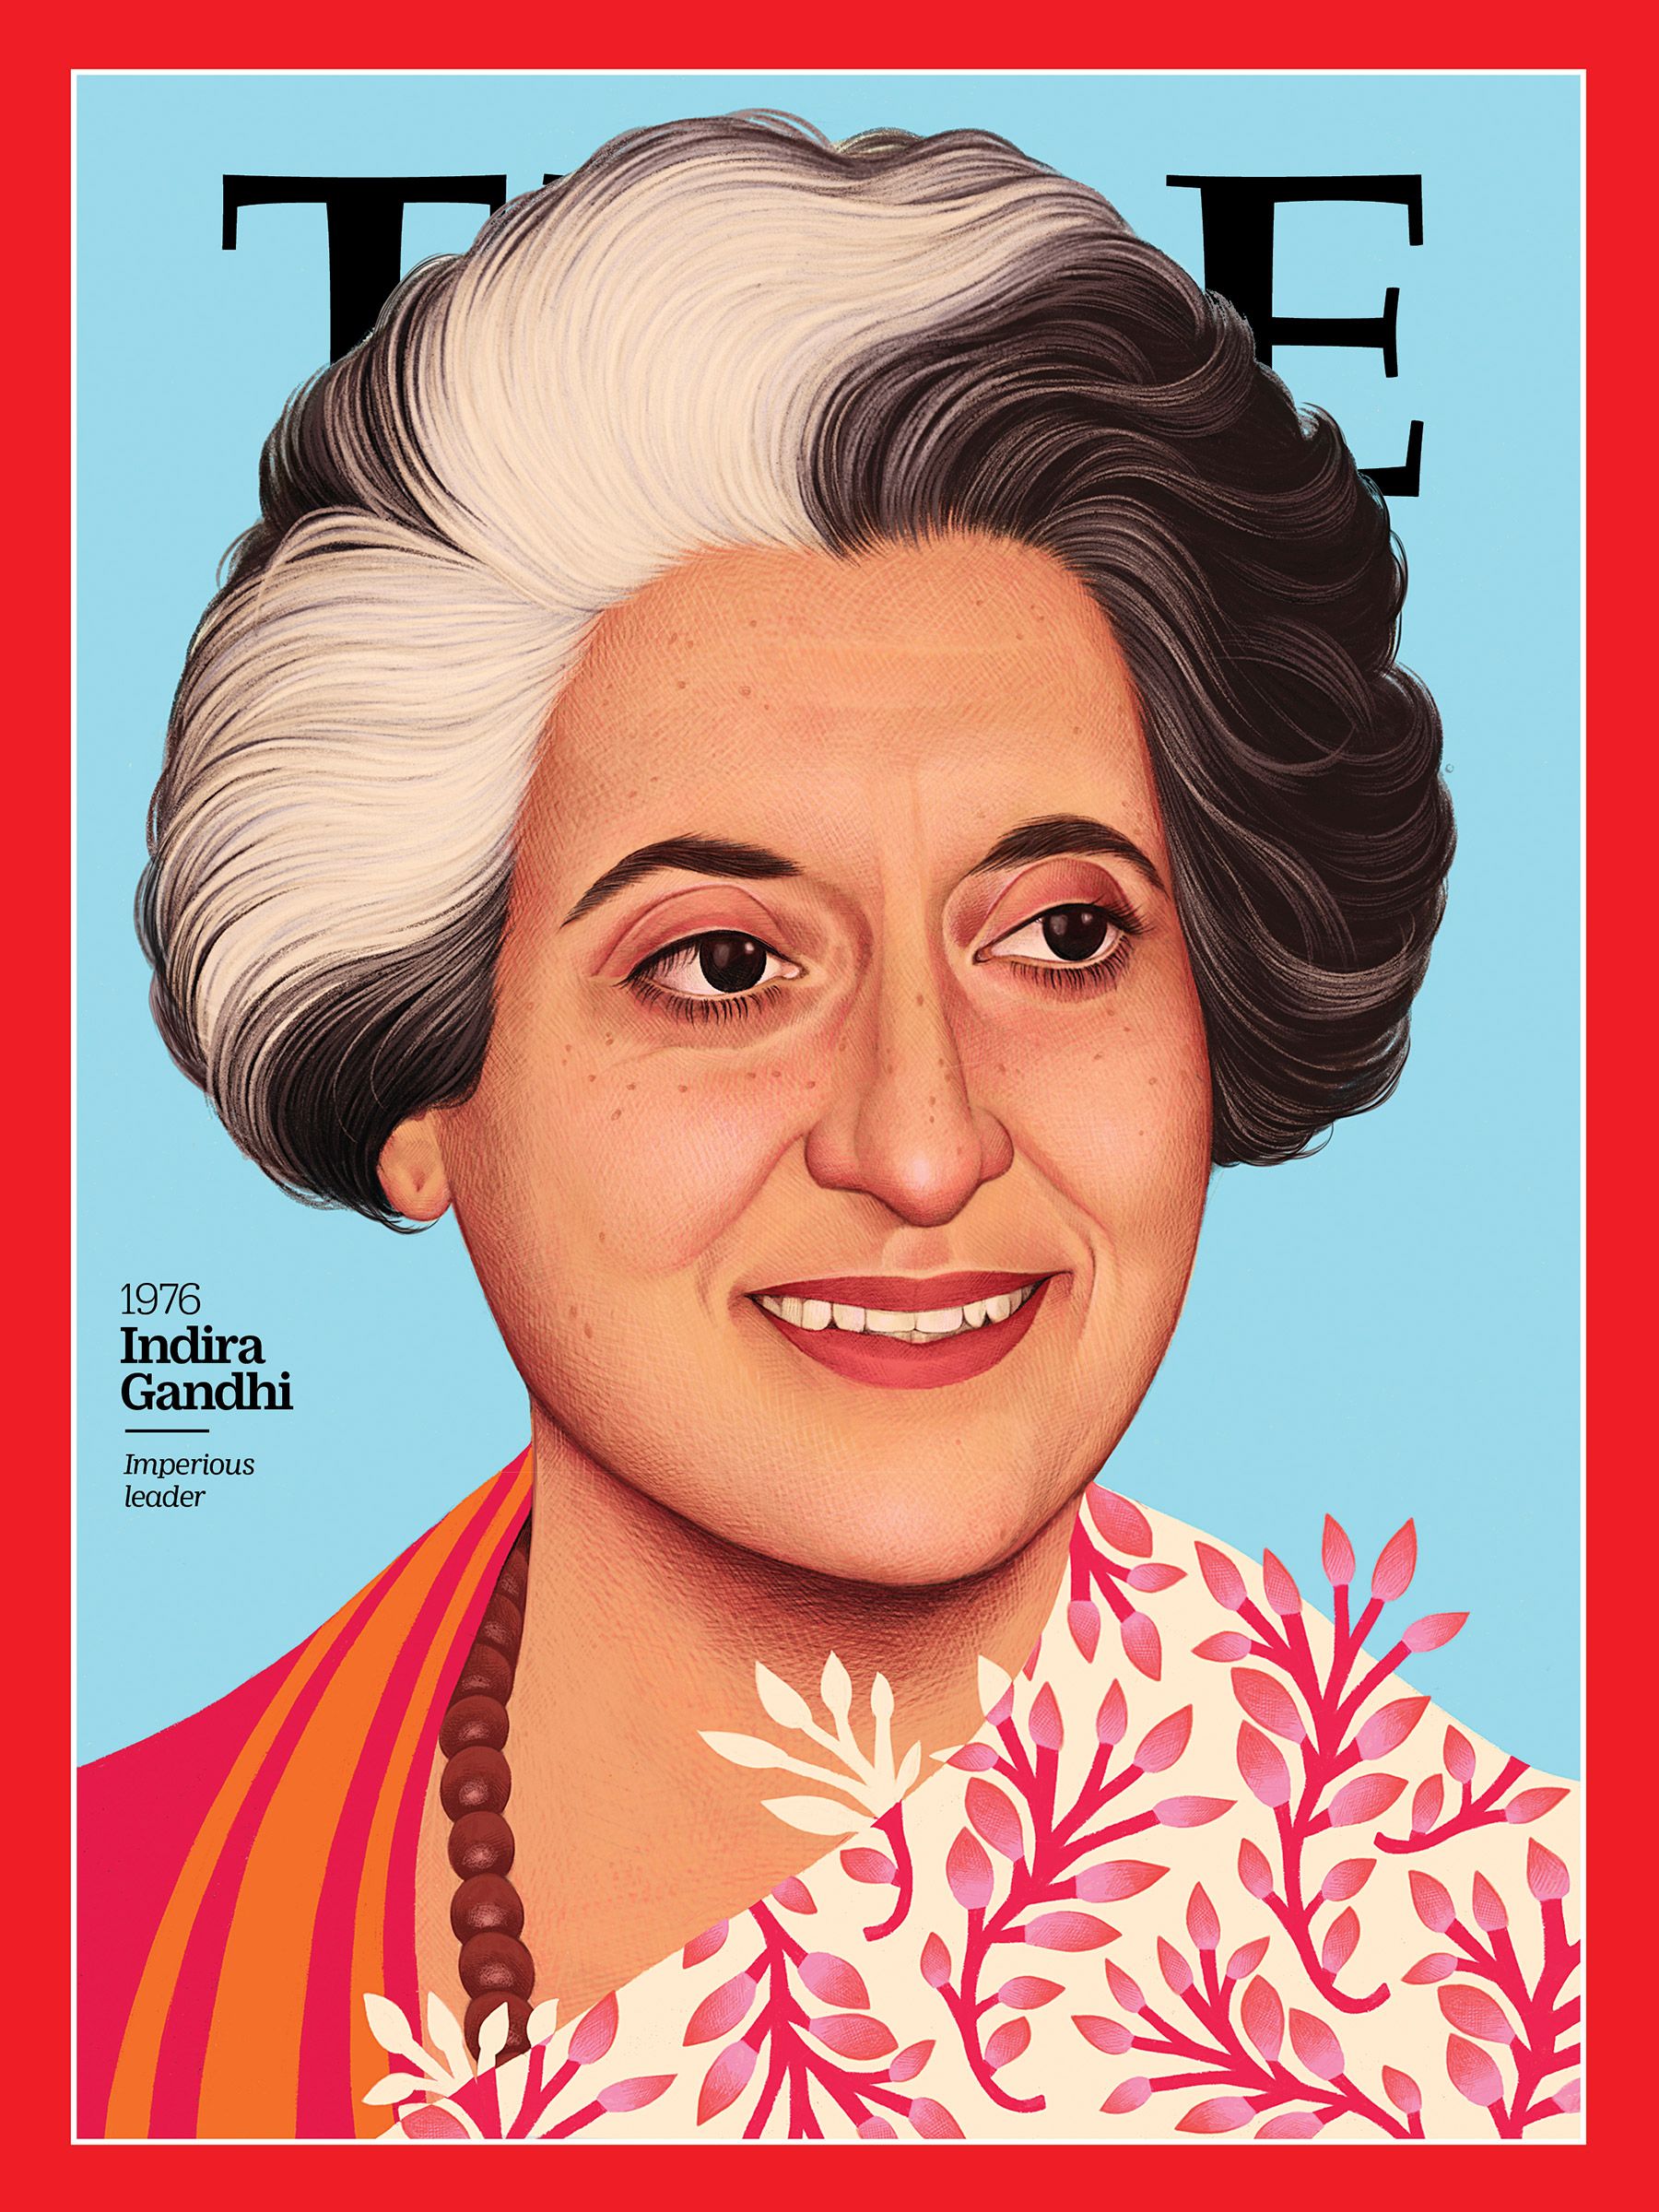 <a href="https://fineartamerica.com/featured/indira-gandhii-1976-time.html"><strong>Buy the cover art→</strong></a> (Illustration by Mercedes DeBellard for TIME; Gilbert UZAN—Gamma-Rapho/Getty)